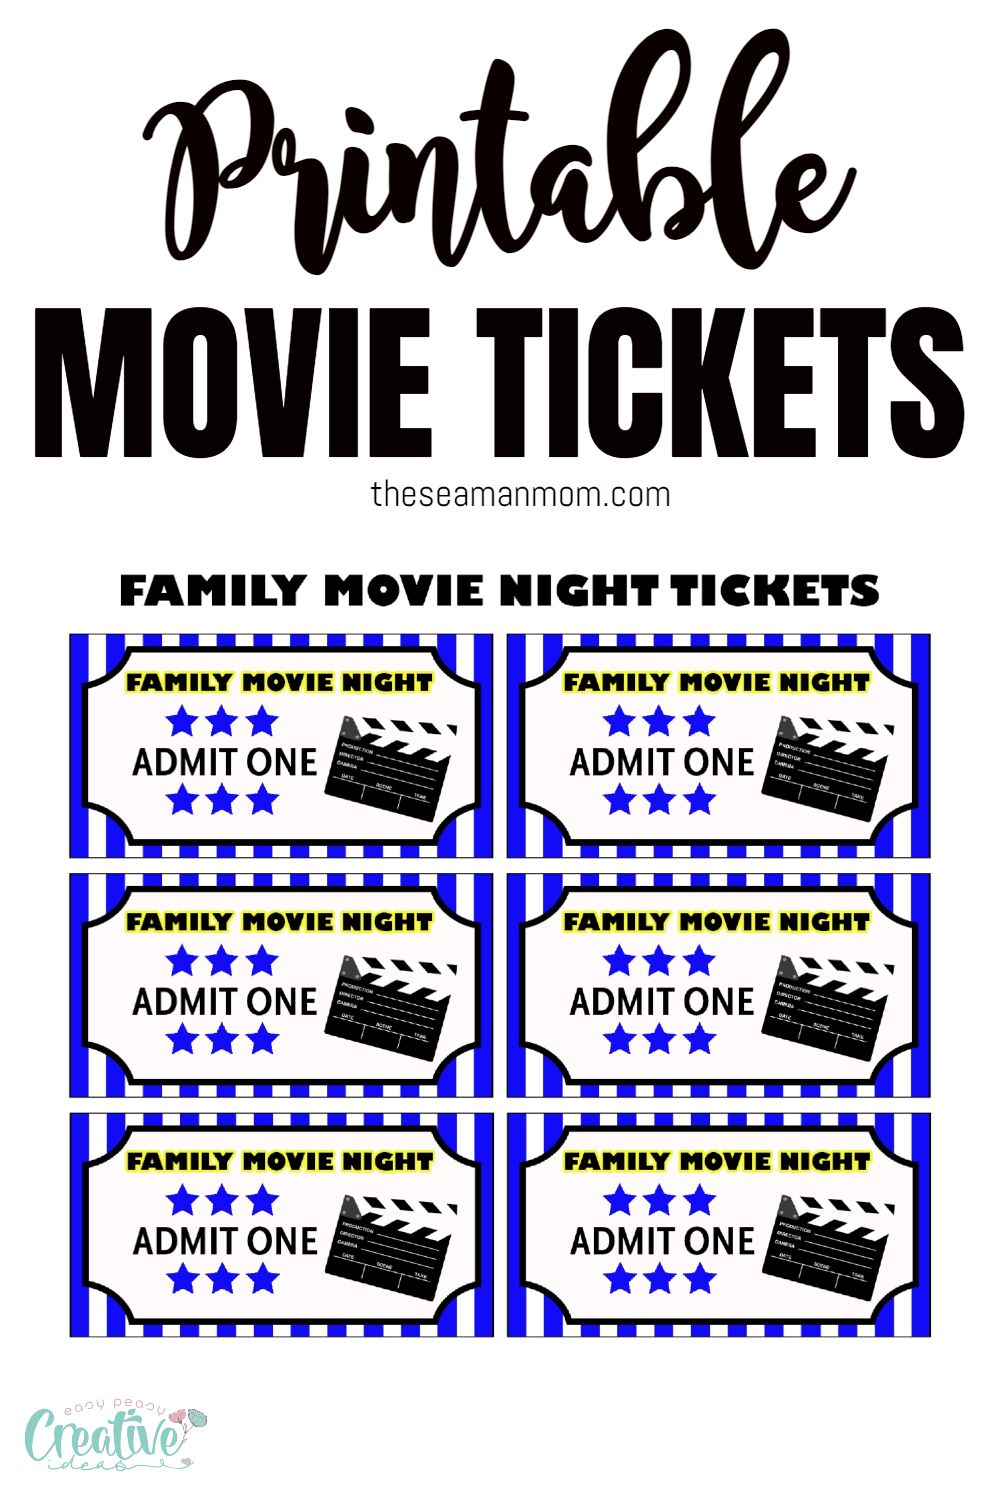 Printable tickets for a special family movie night.